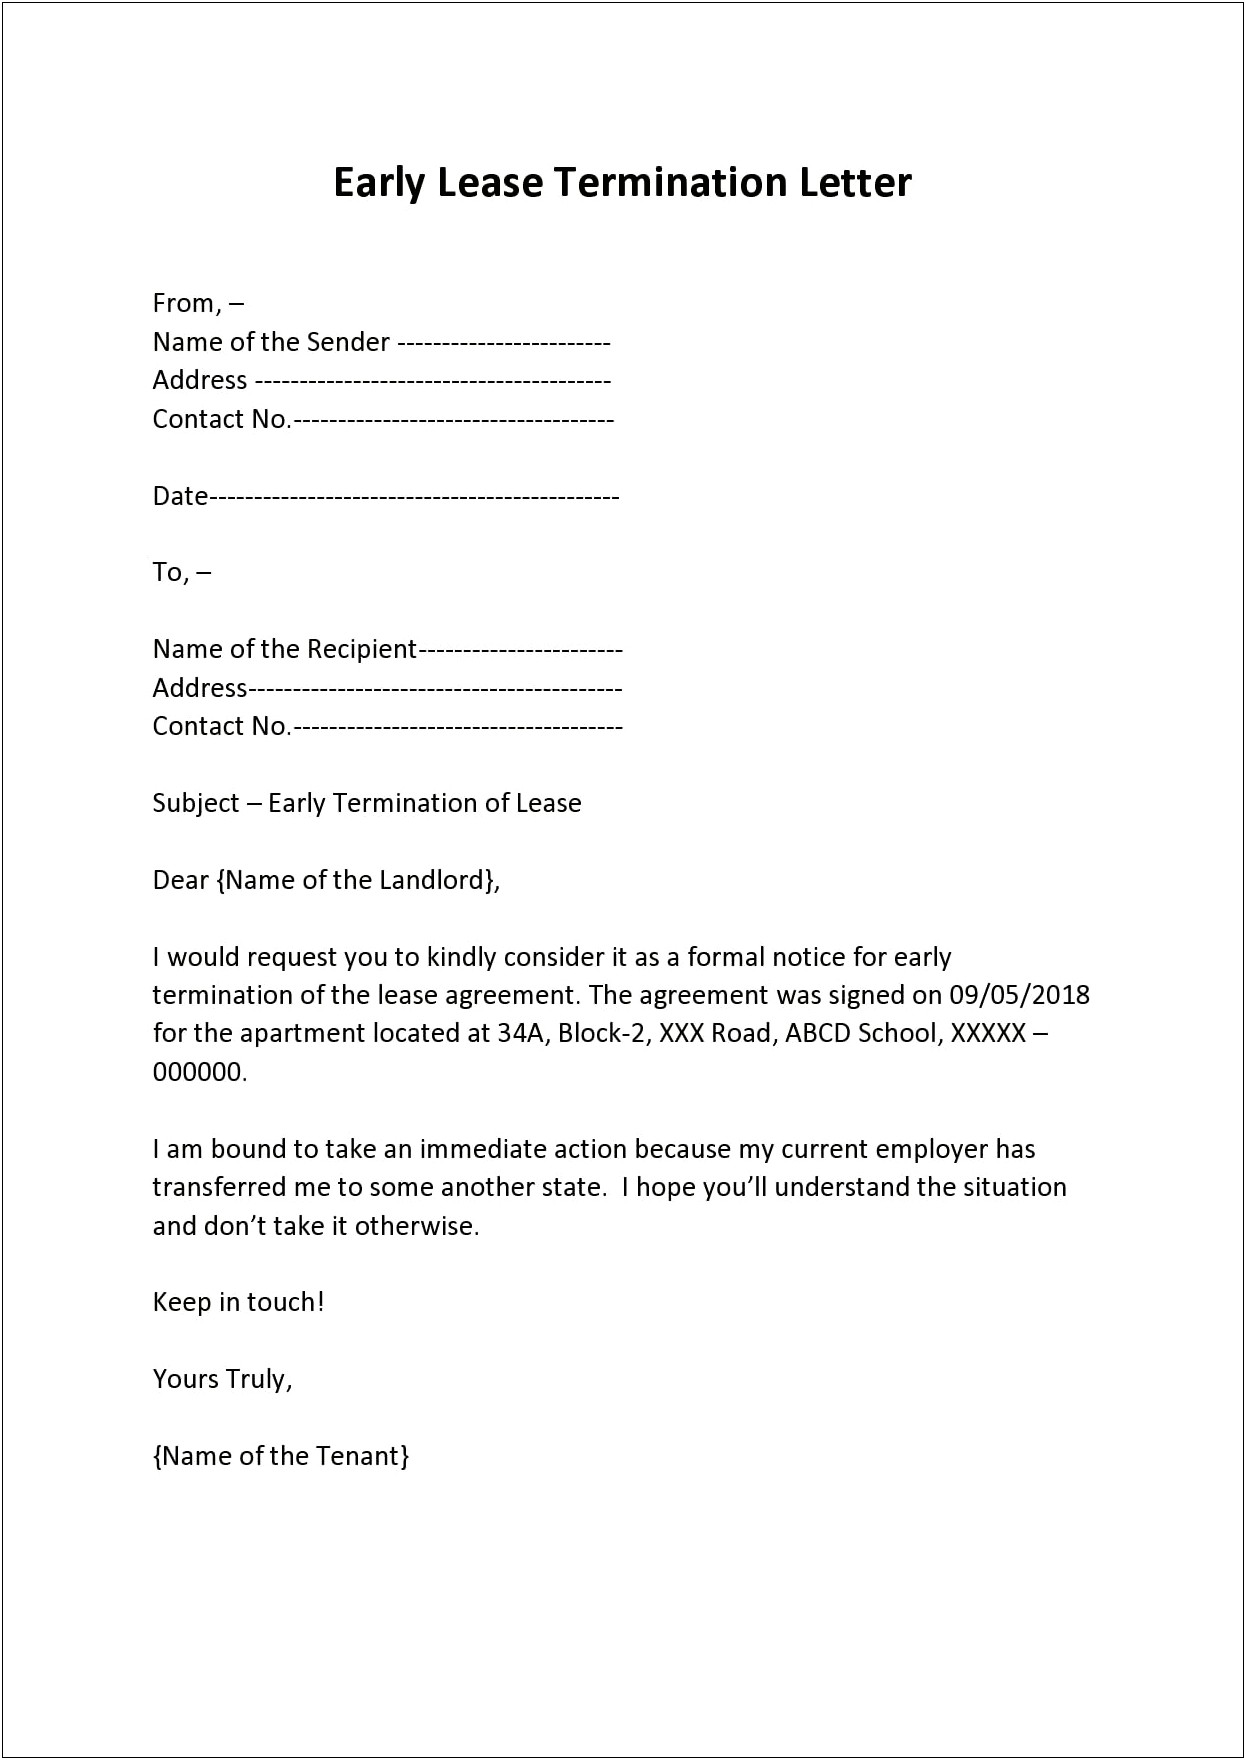 Lease Termination Letter Template To Landlord